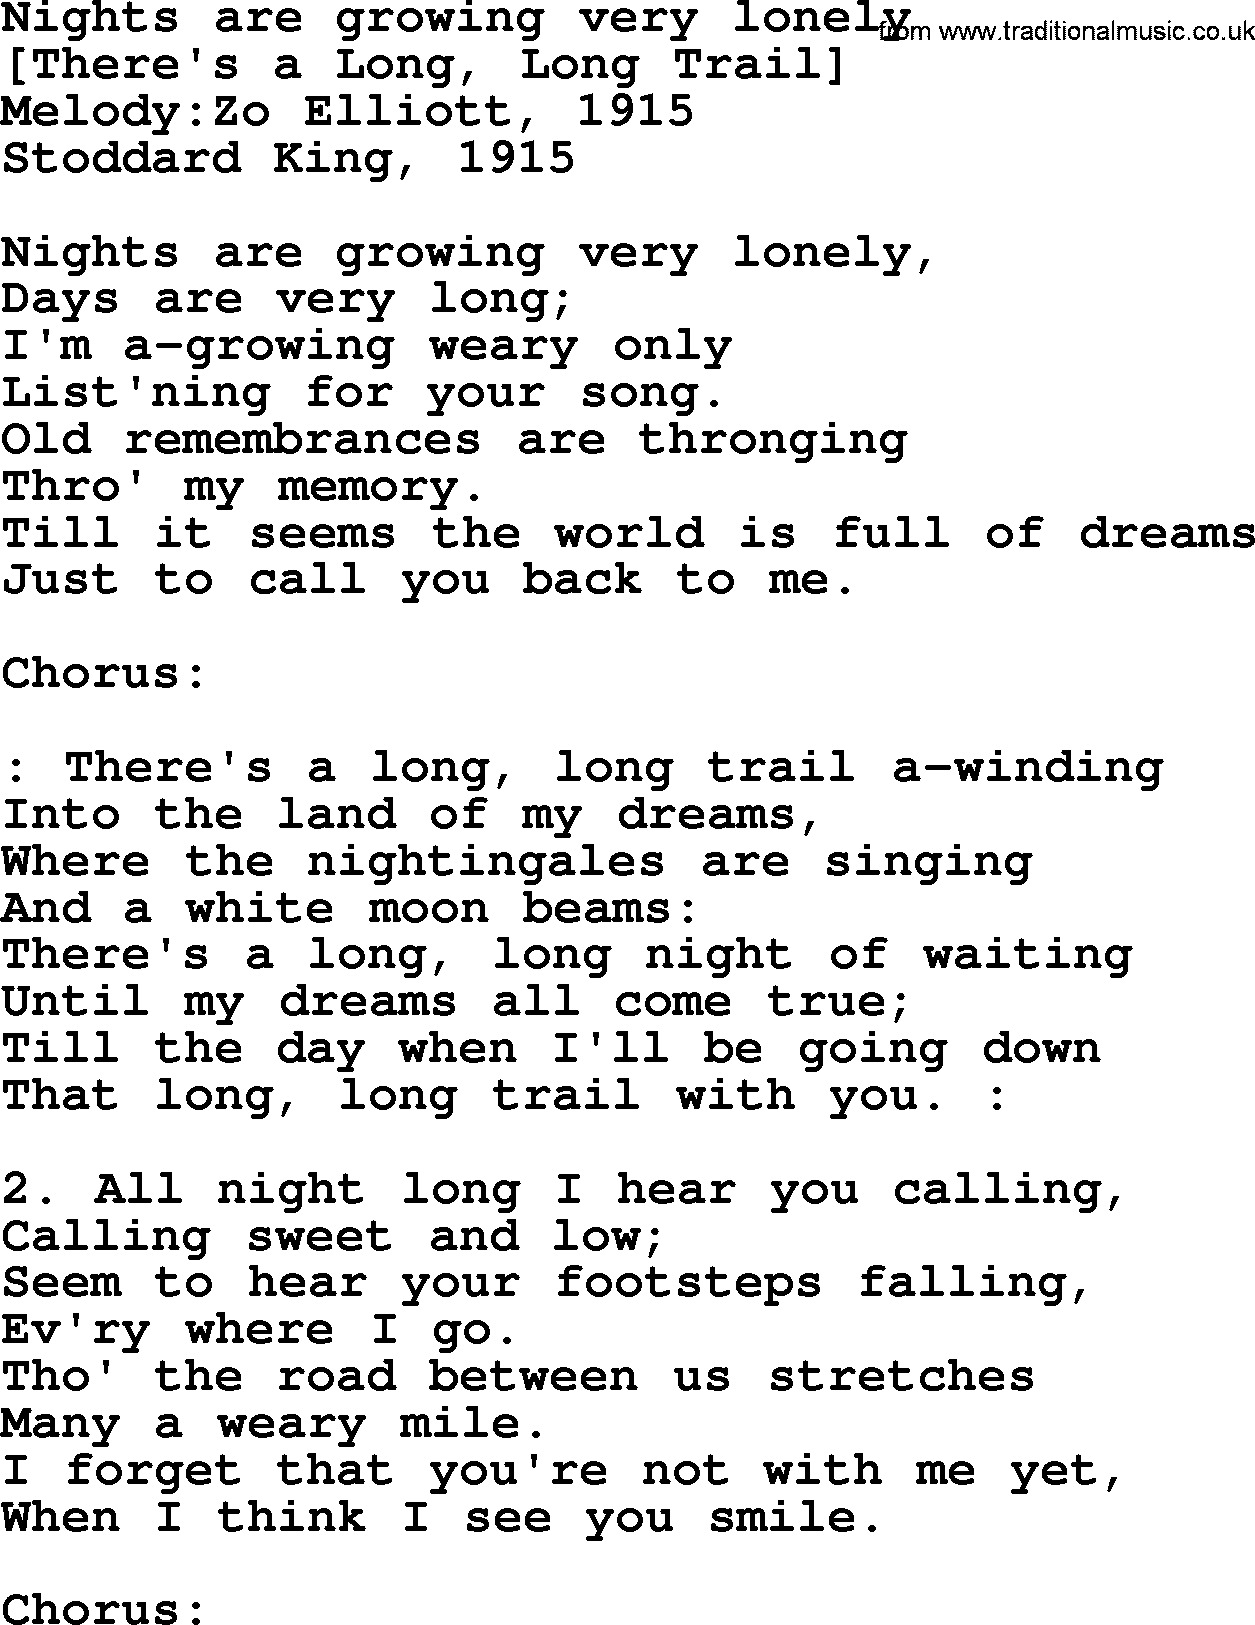 Old American Song: Nights Are Growing Very Lonely, lyrics